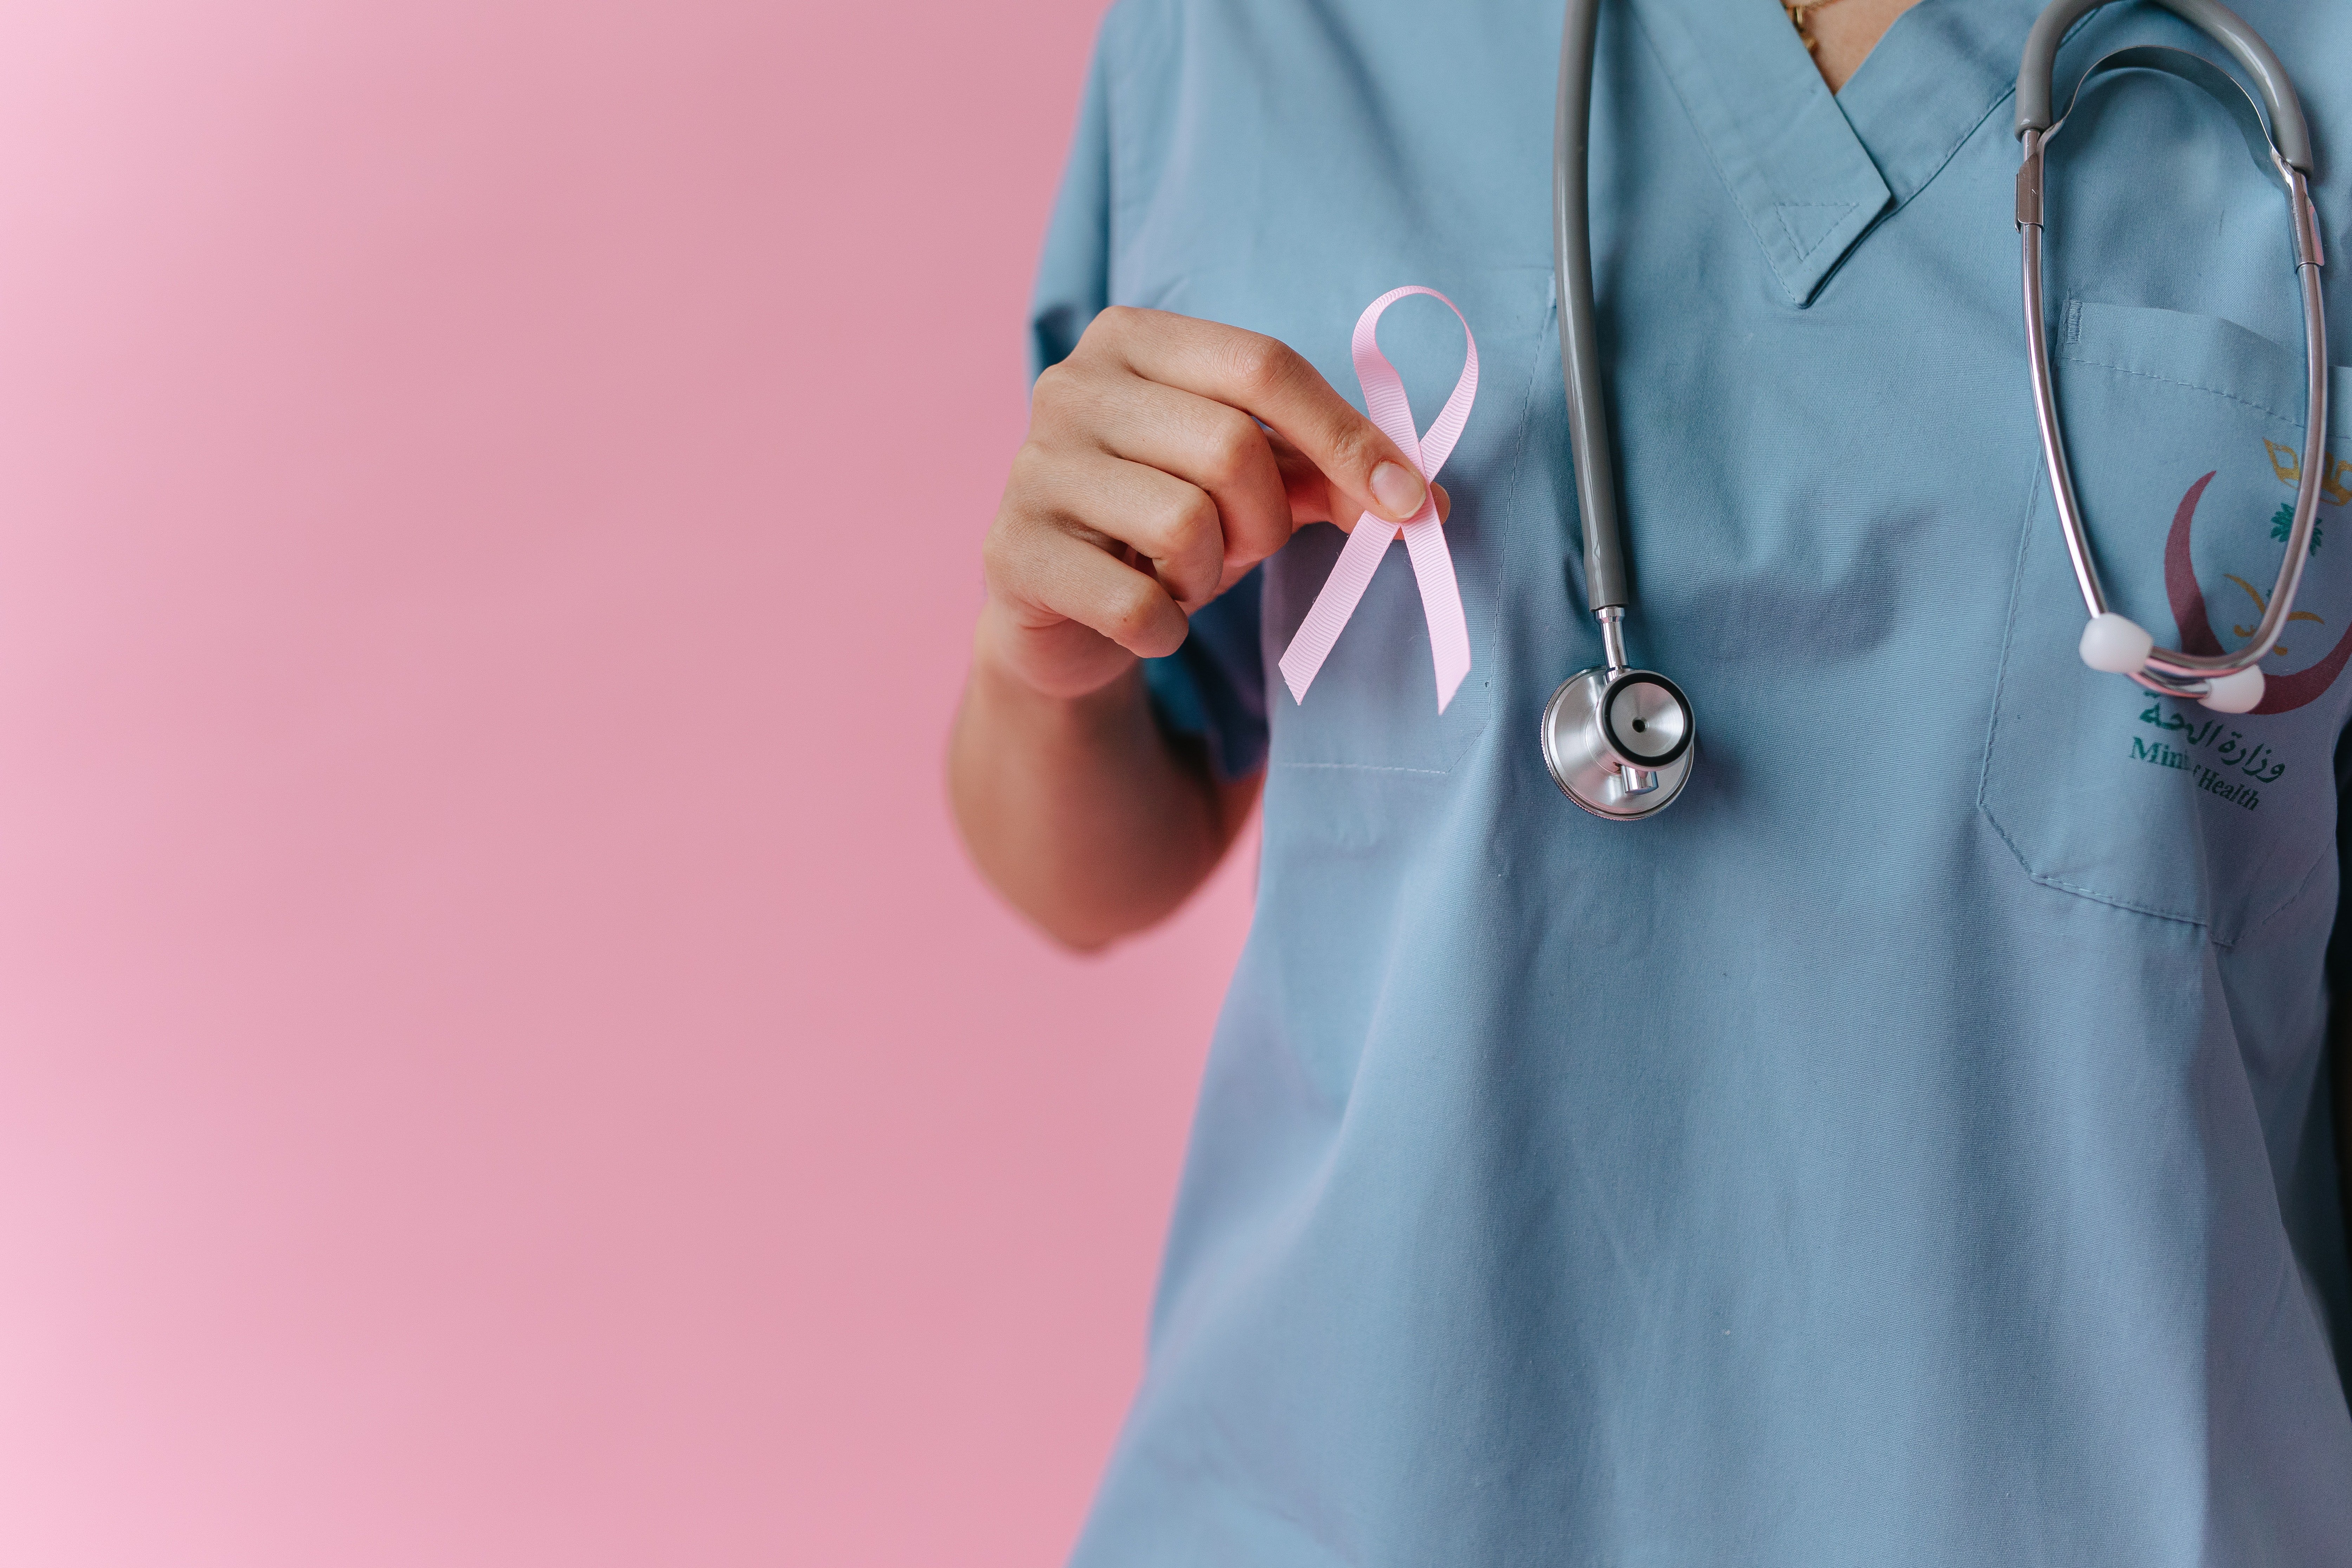 Pictured - A photo of an individual wearing scrubs with a stethoscope holding a pink ribbon | Source: Pexels  